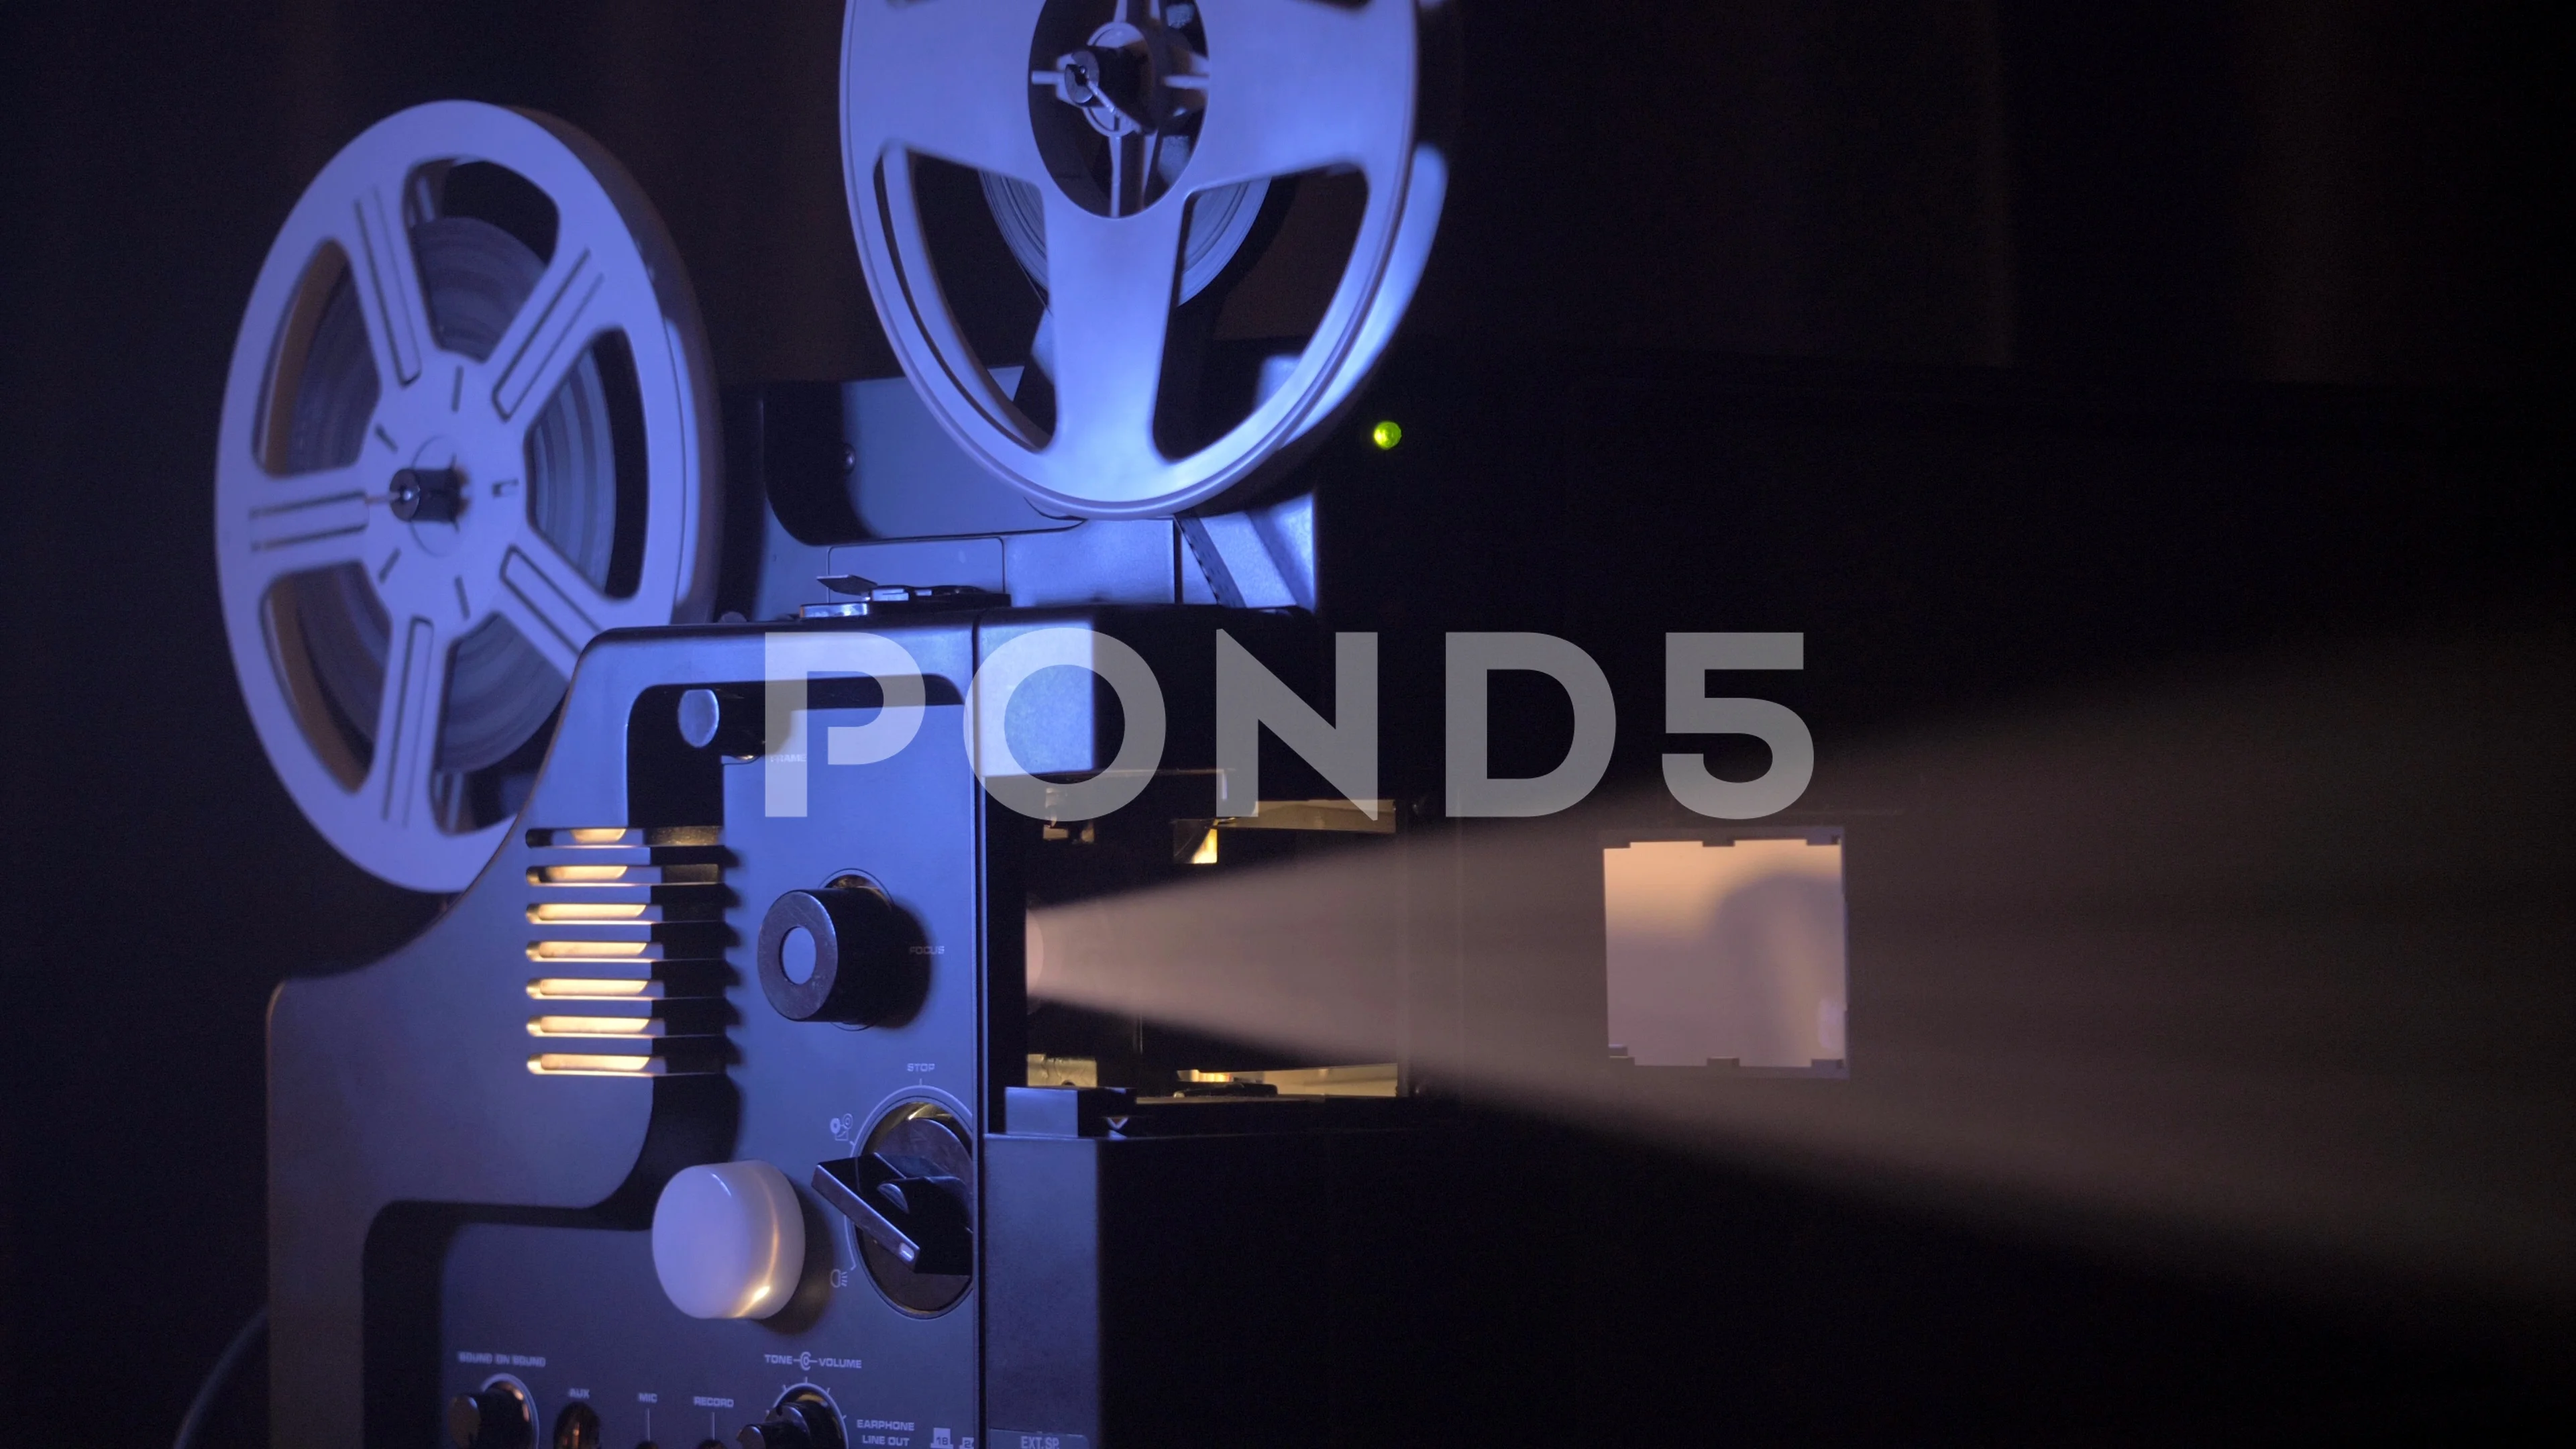 8mm Film Projector with Light Rays Cine , Stock Video